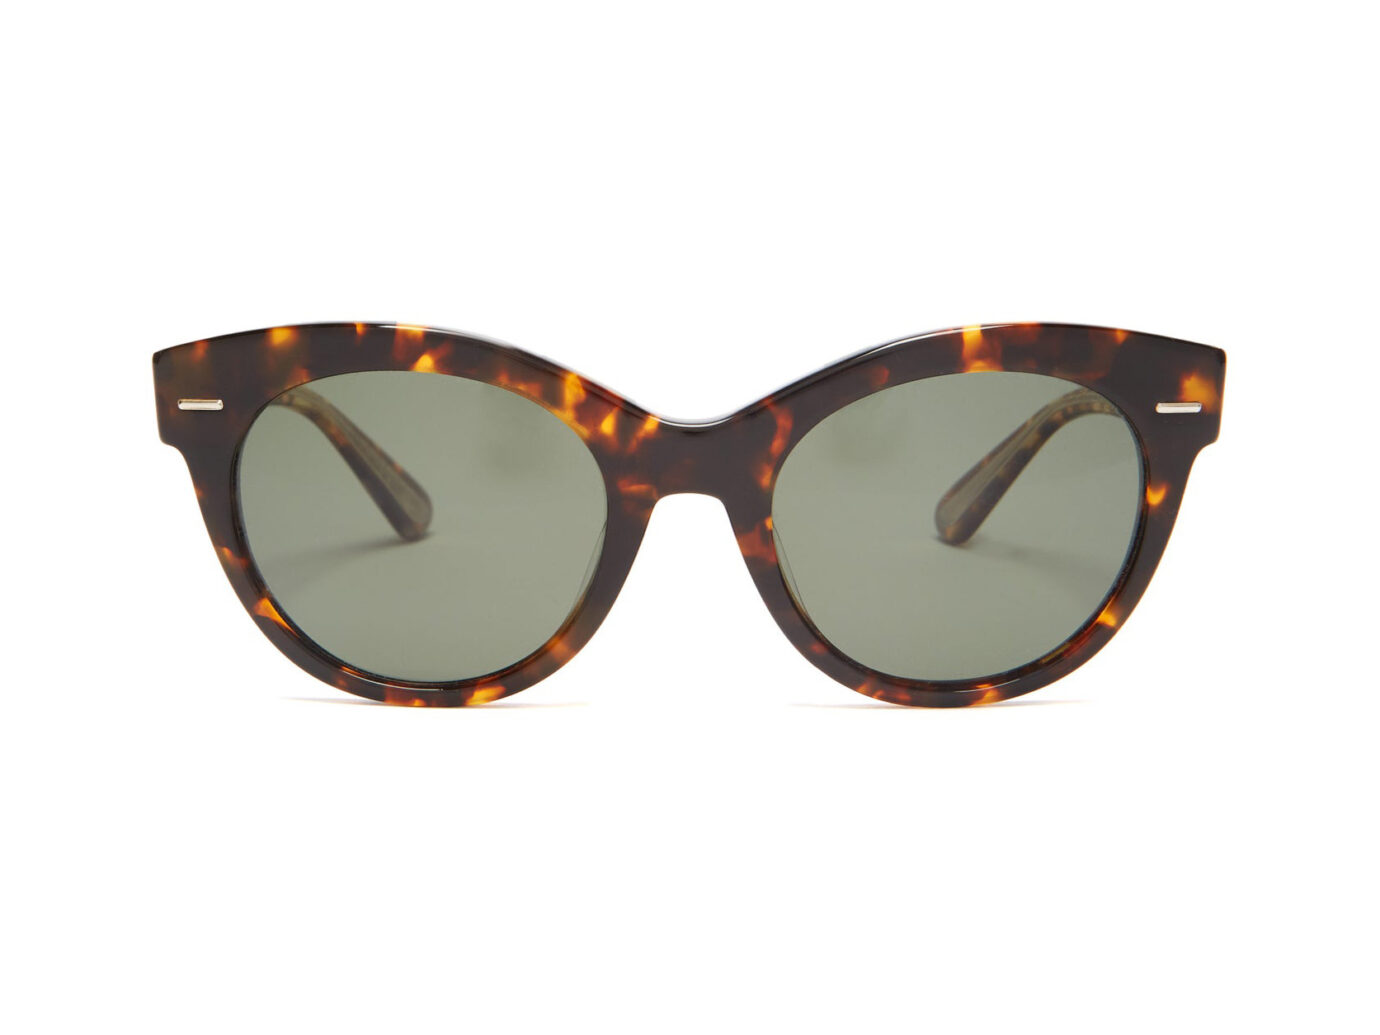 The Row X Oliver Peoples Georgica cat-eye sunglasses